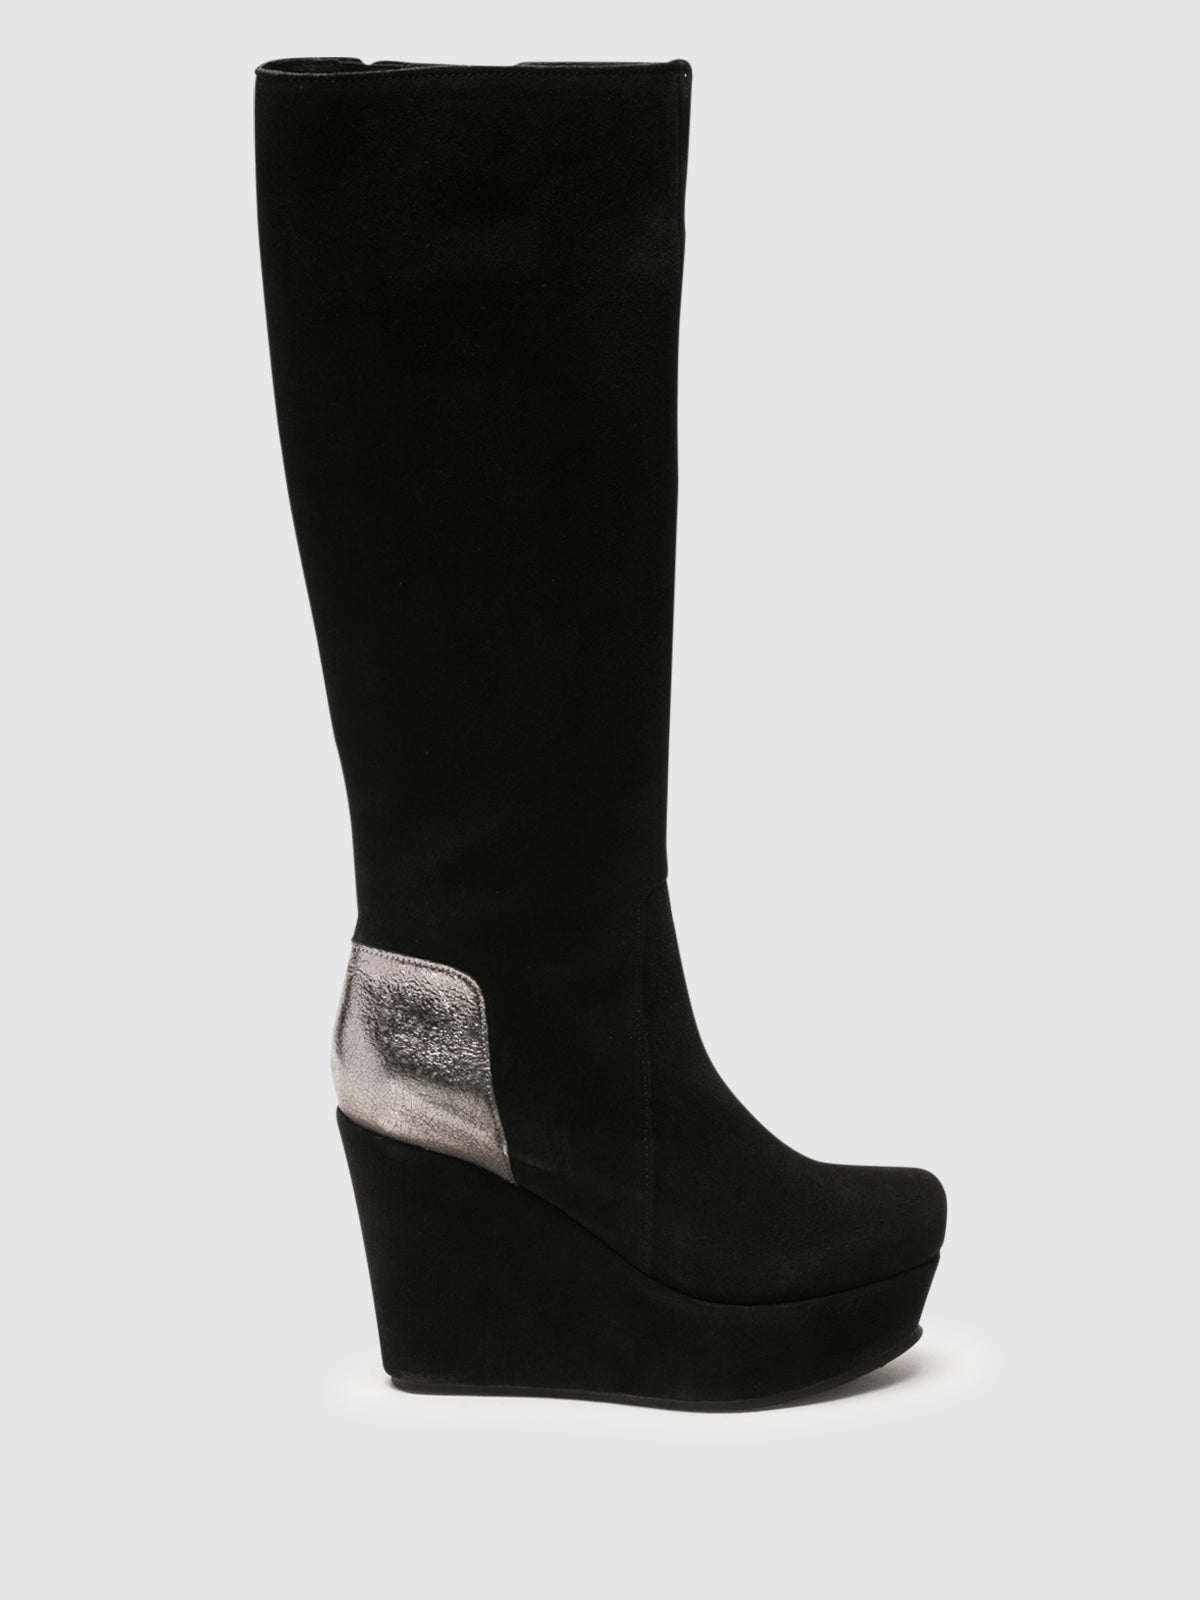 Clay's Black Knee-High Boots